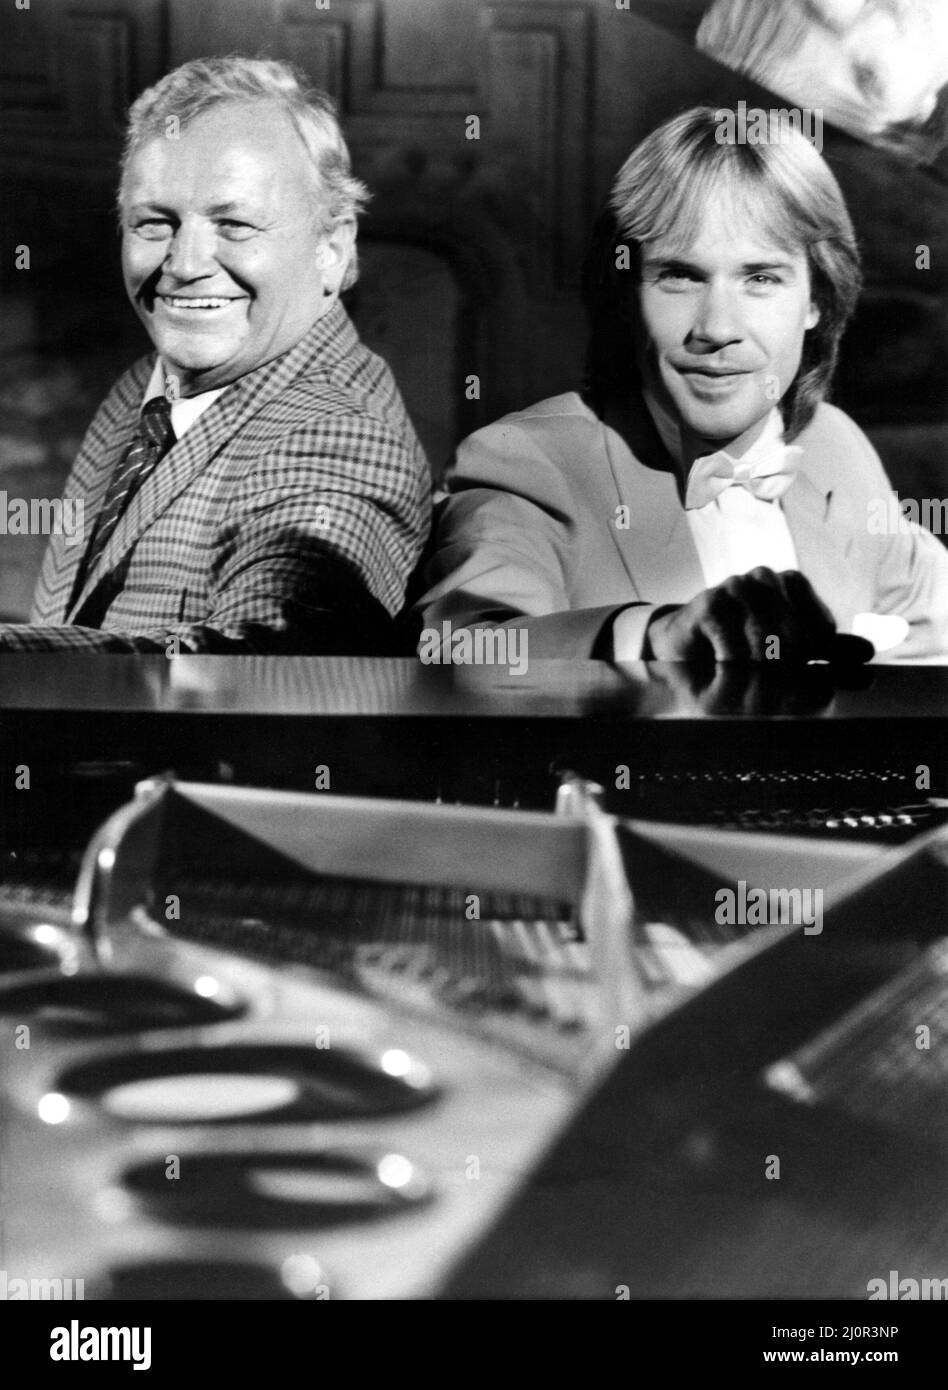 Former 'Goon' Sir Harry Secombe and pianist Richard Clayderman are pictured at Newcastle's Castle Keep. The pair were there for the filming of Sir Harry's programme Highway.    16th October, 1983 Stock Photo